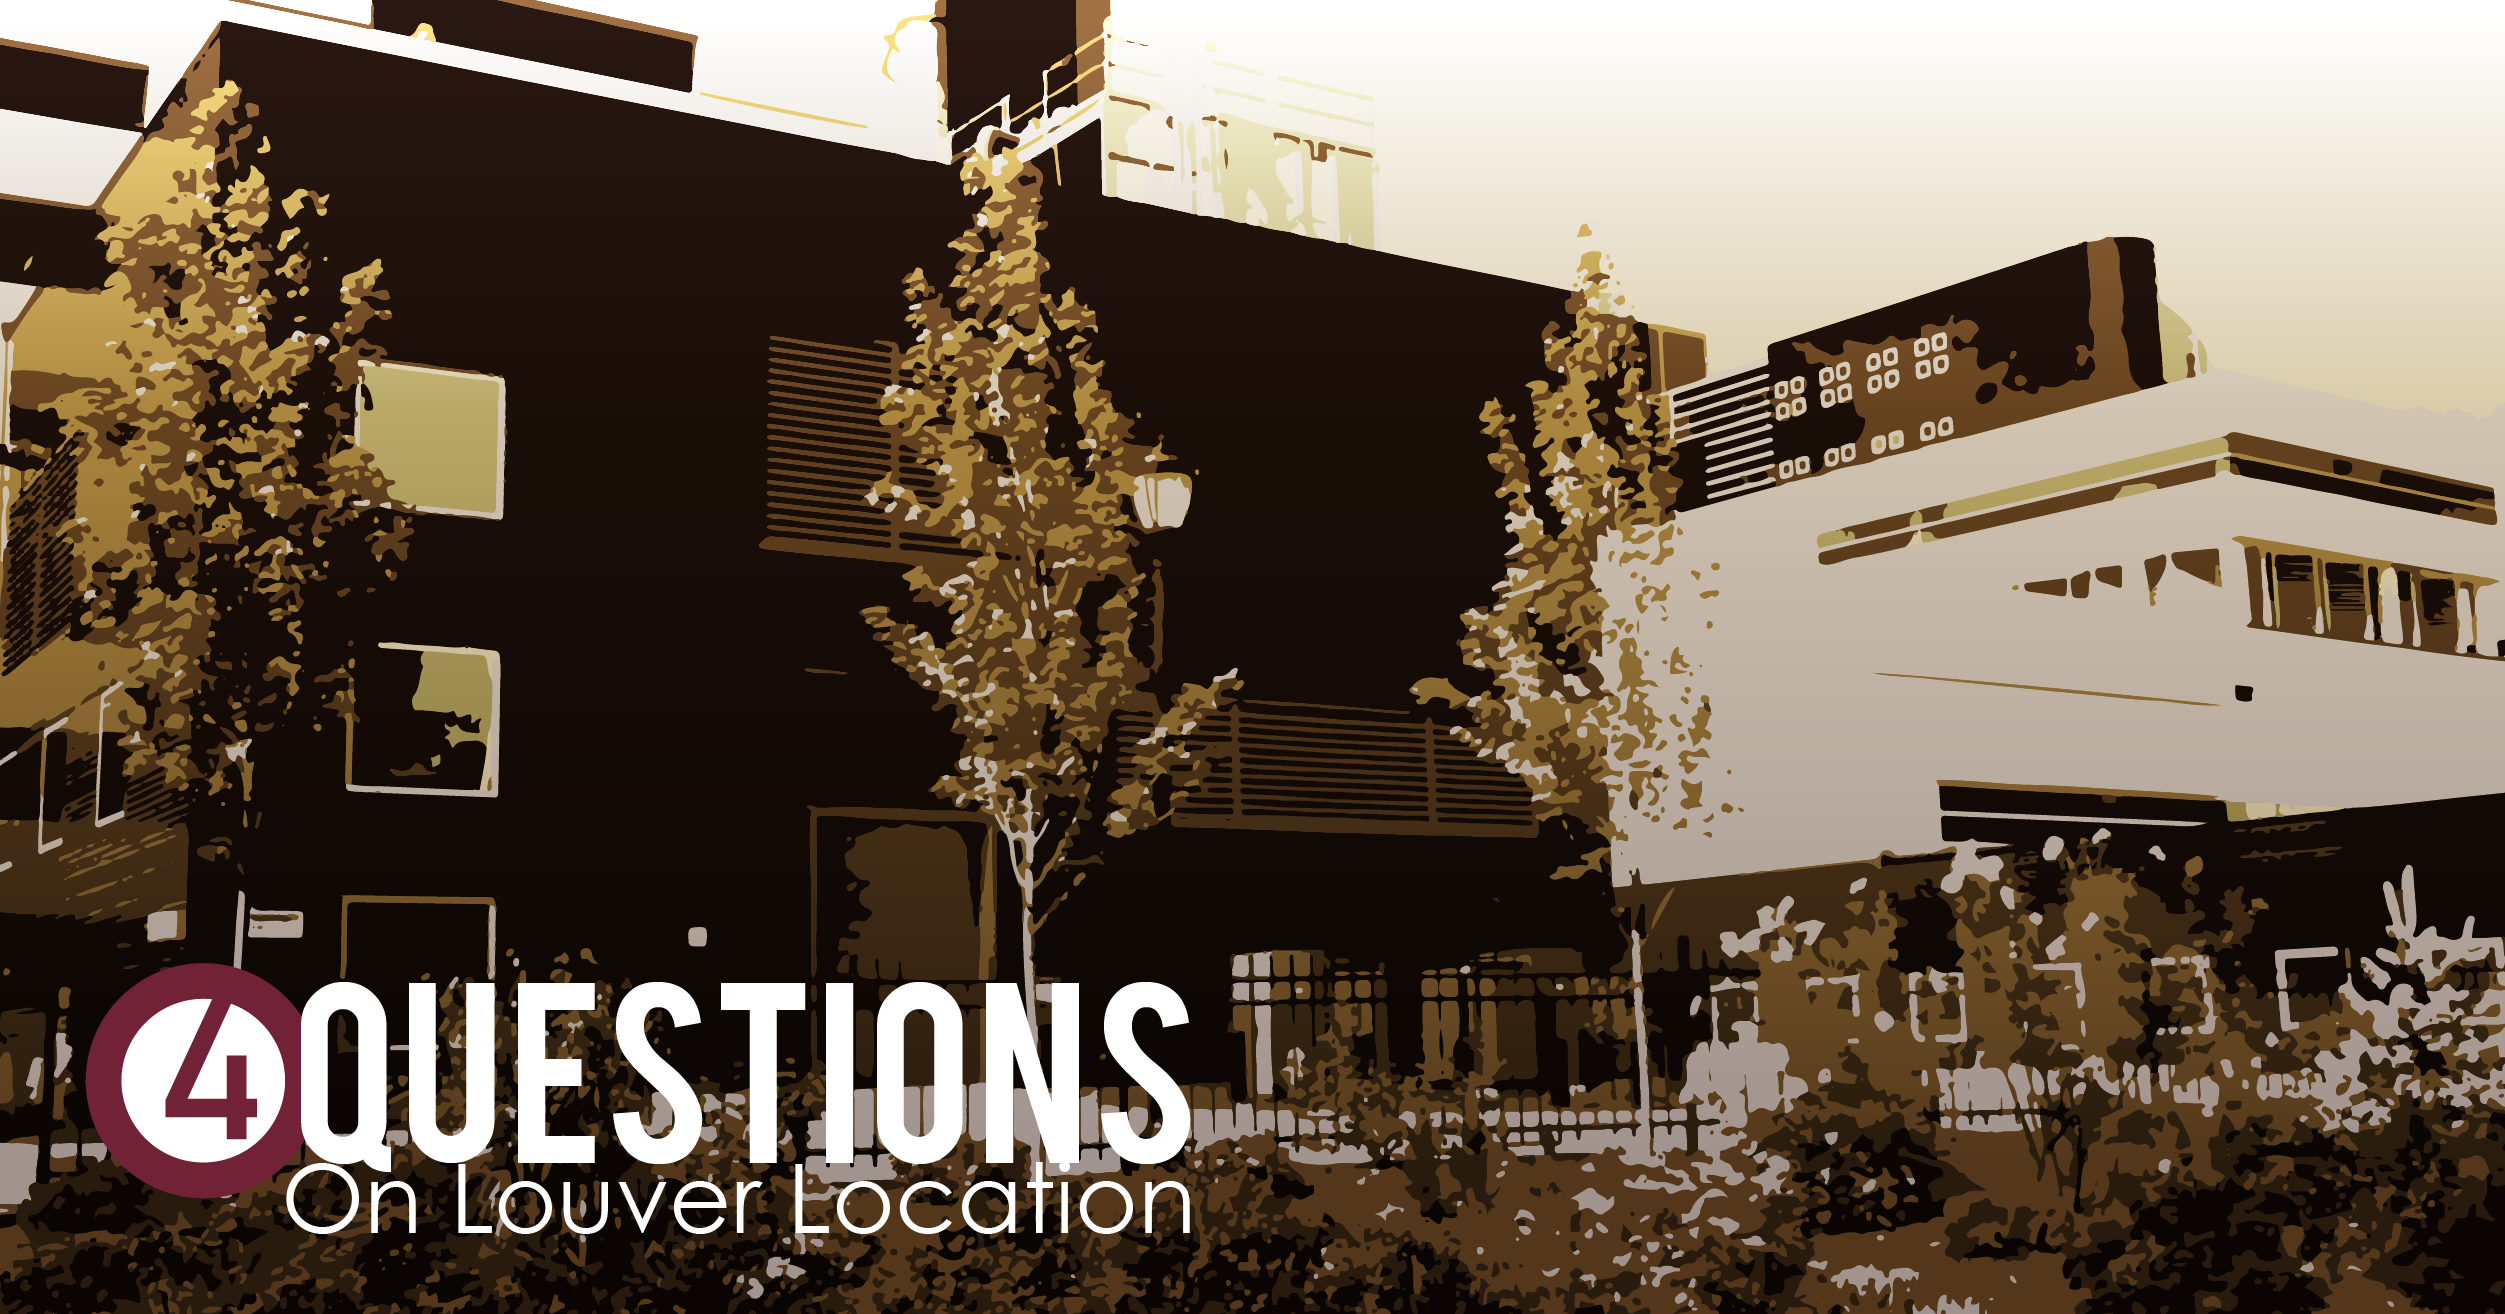 MCDLG Newsstand - Four Questions on Louver Location